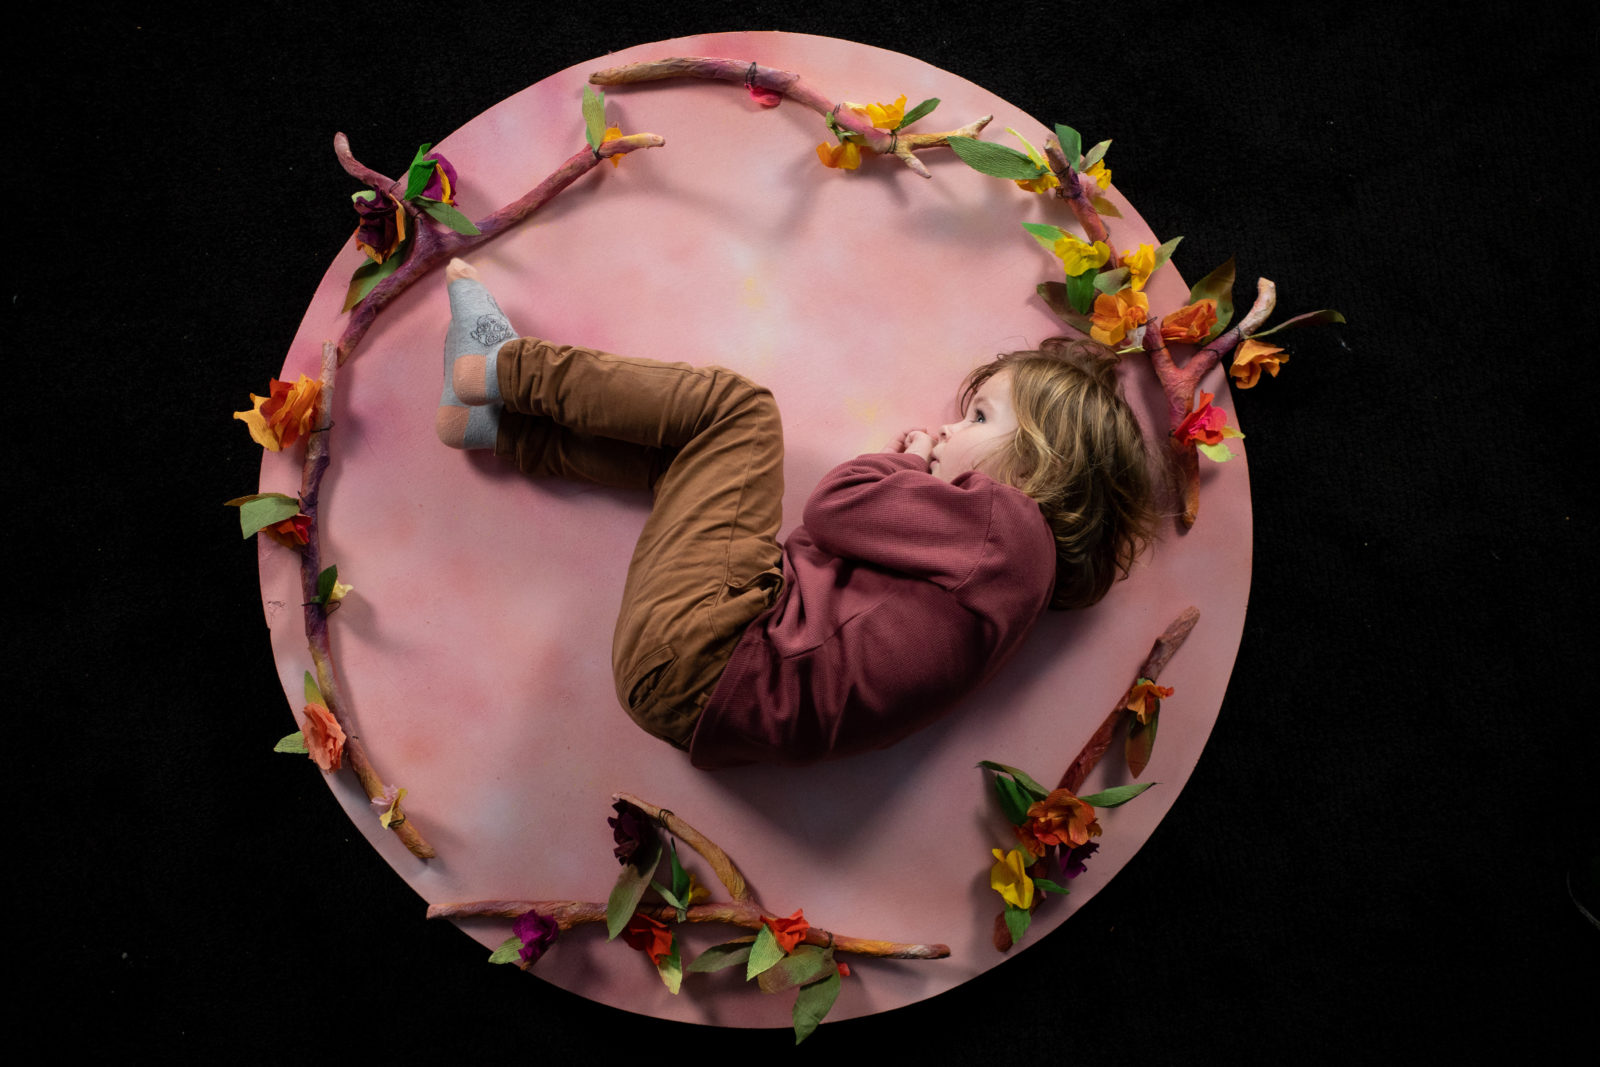 Child lying curled up on large pink hand made moon, surrounded by hand made floral antlers.